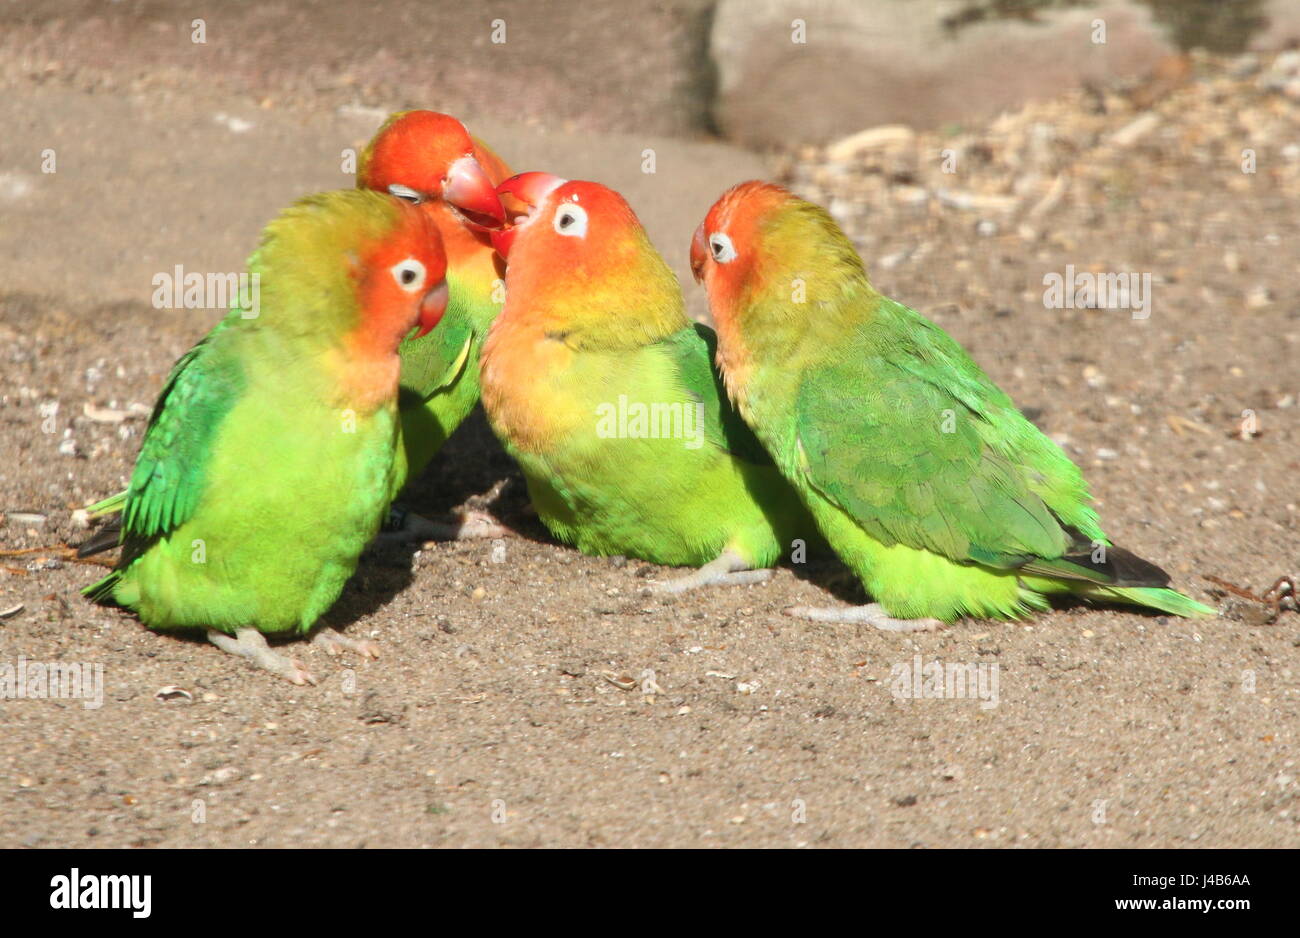 Small Parrots High Resolution Stock Photography And Images Alamy,How To Cut Concrete Pavers